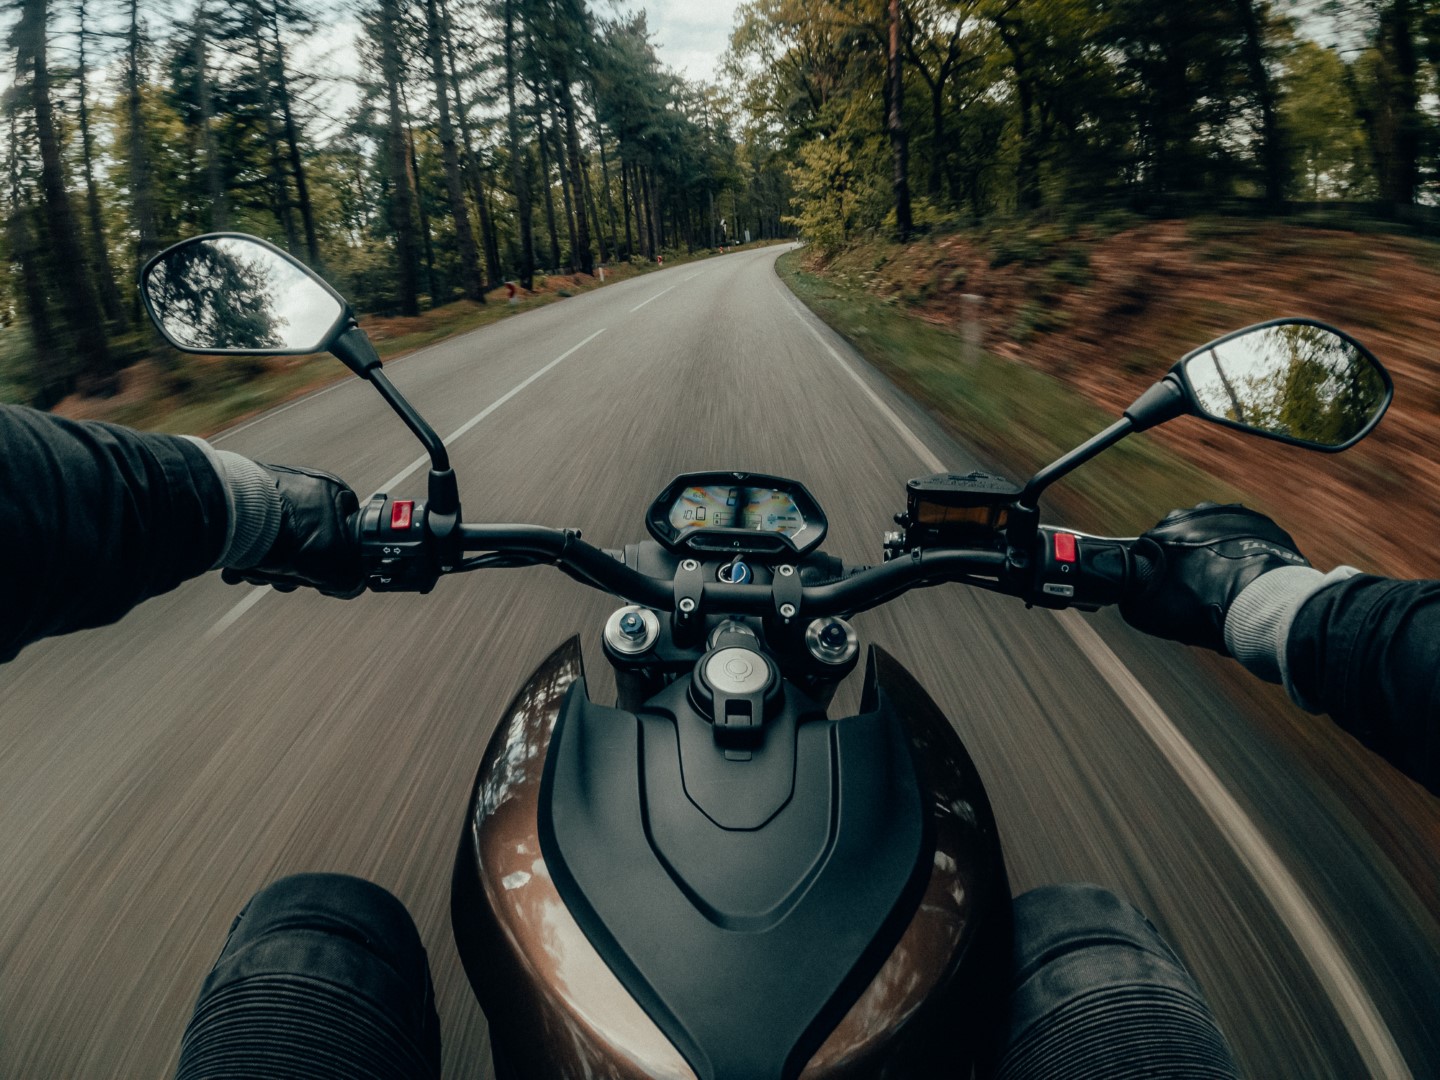 So, you want to ride a motorcycle?